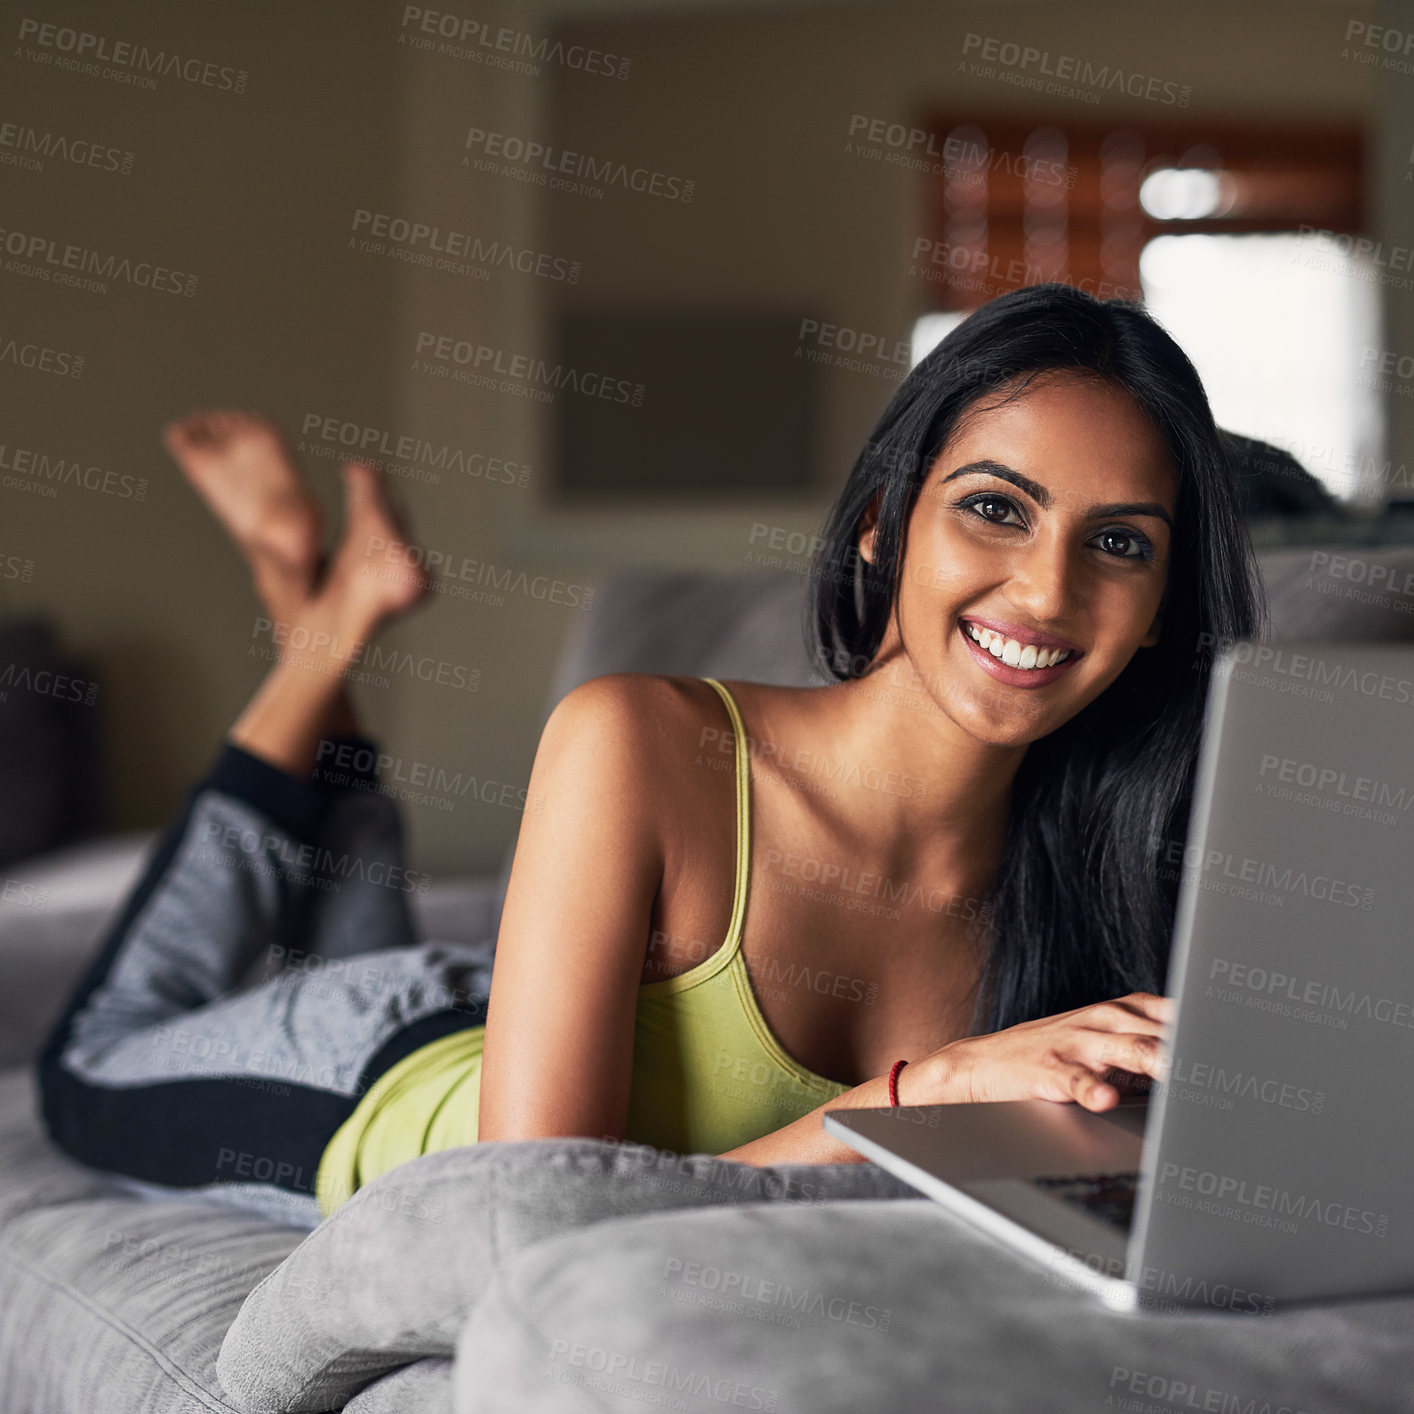 Buy stock photo Portrait of an attractive young woman surfing the net while lying on her sofa at home